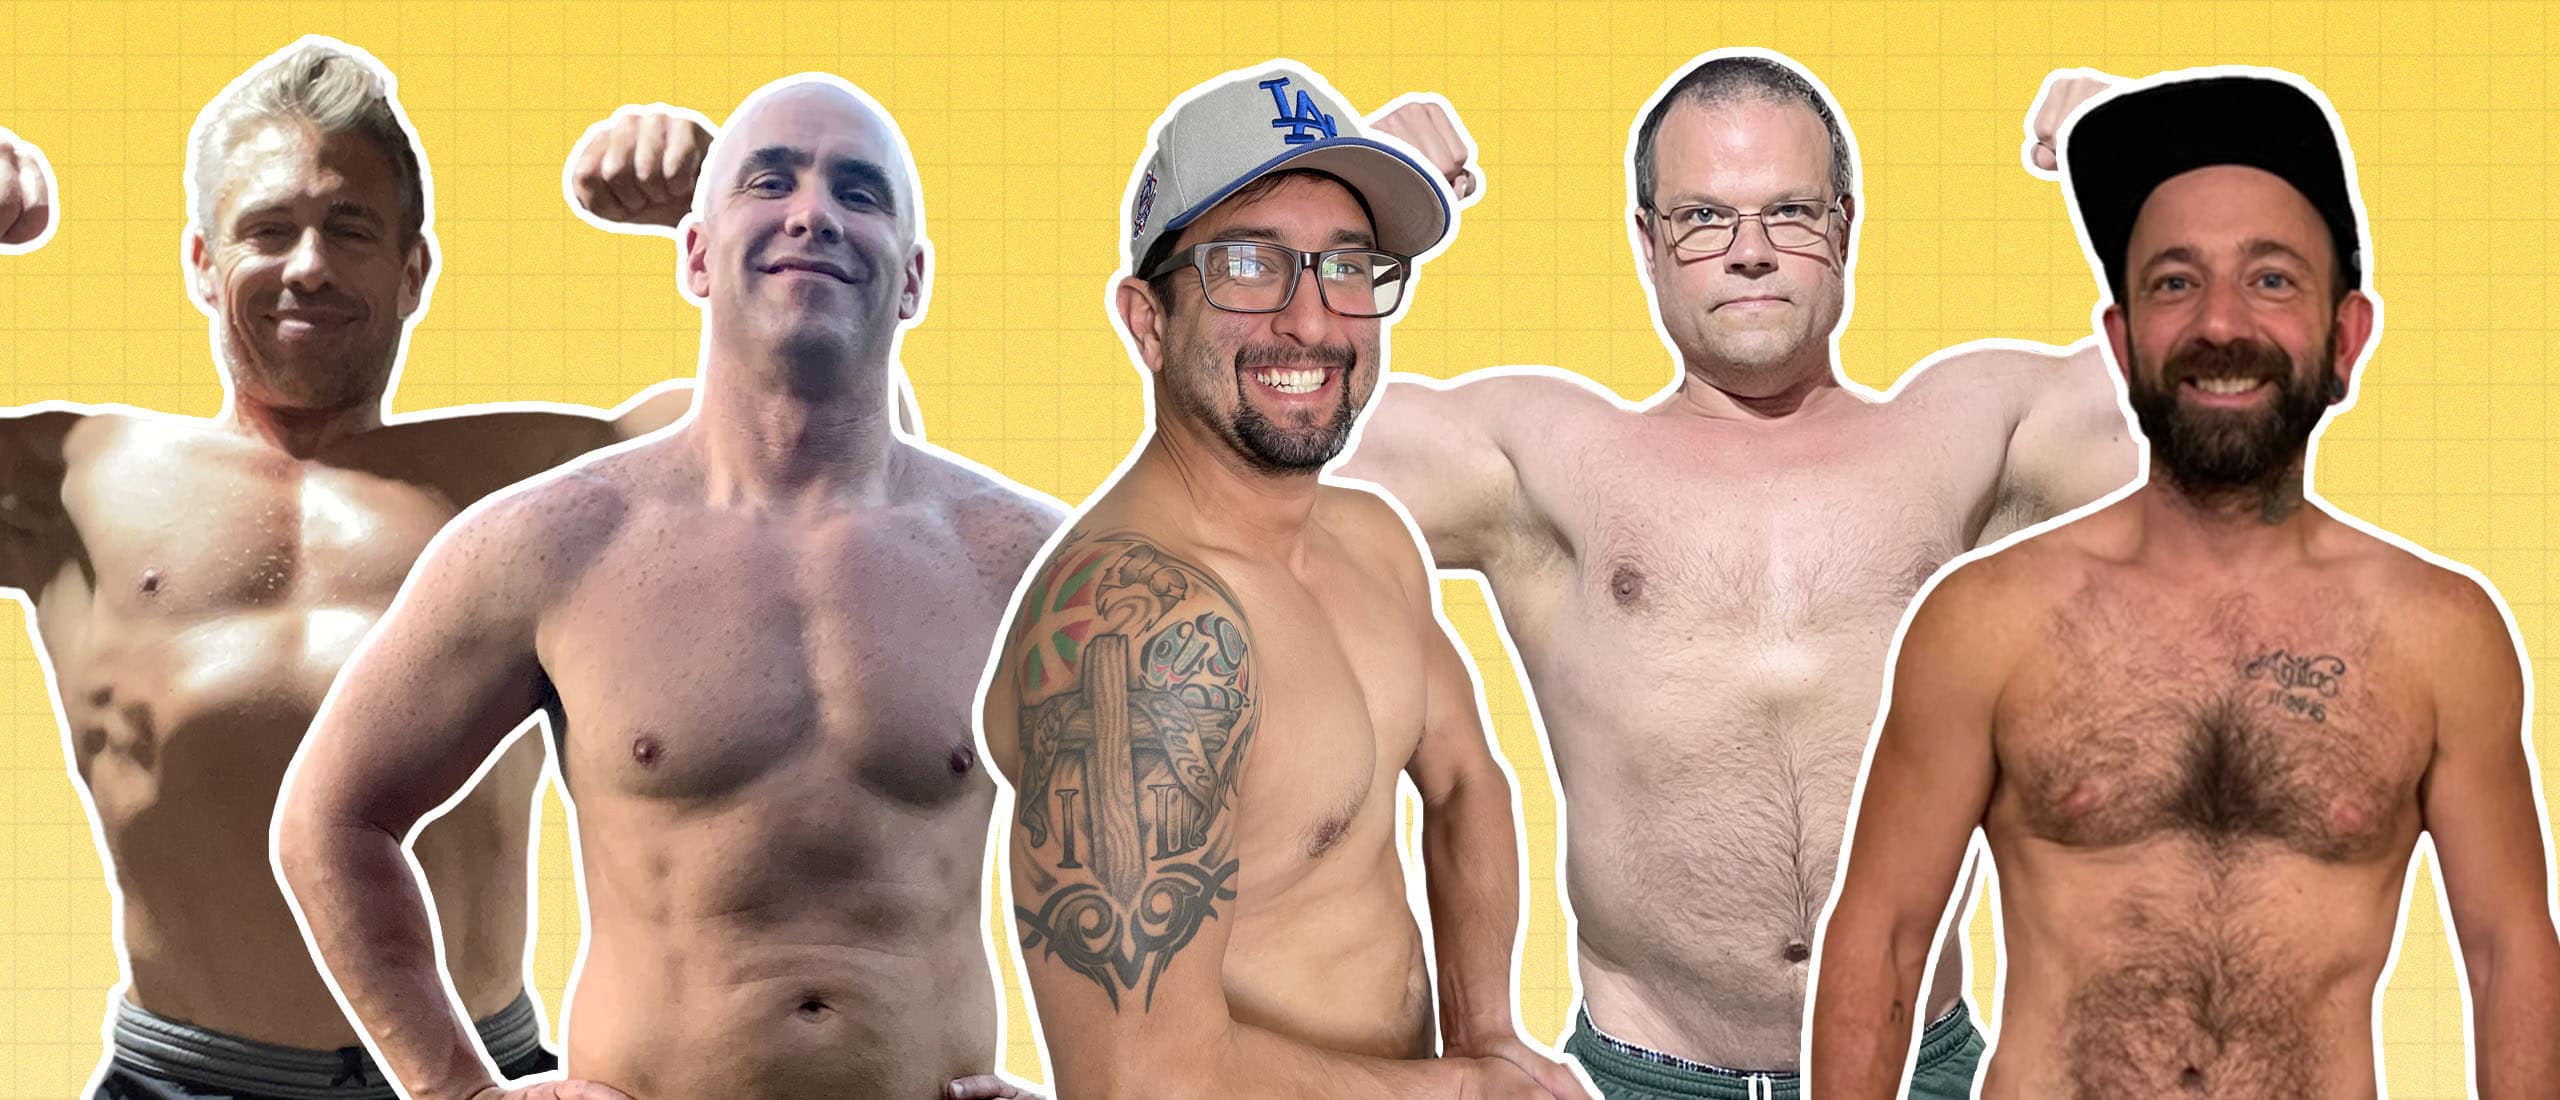 5 men after testosterone replacement therapy